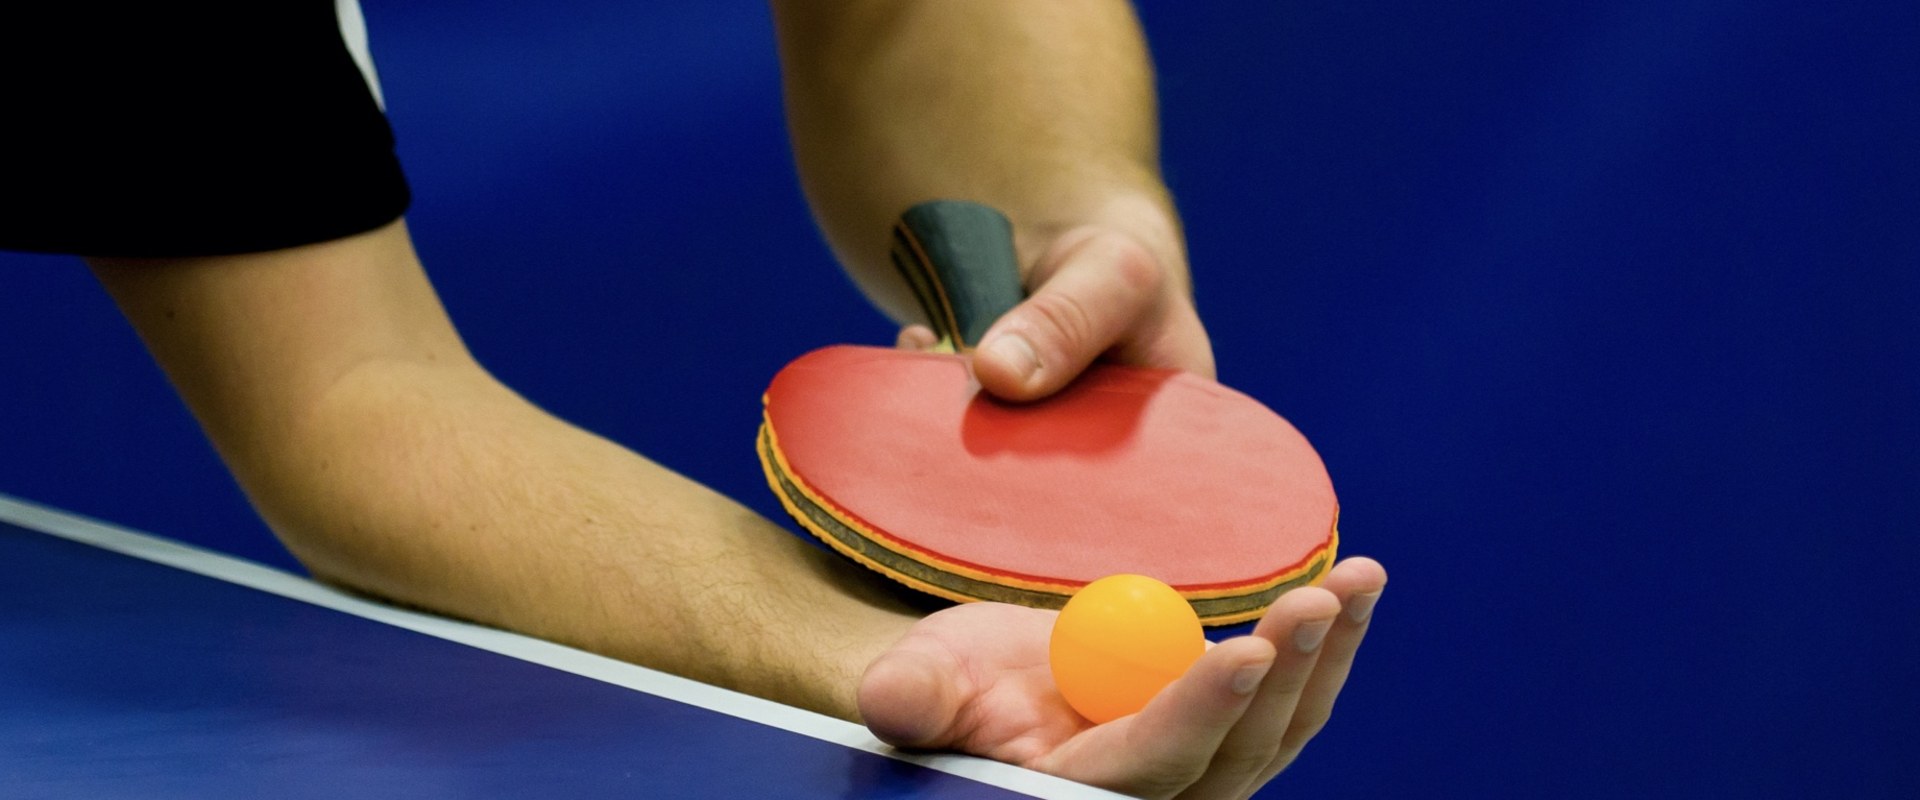 How Many Points Can You Score in a Single Set of Table Tennis?